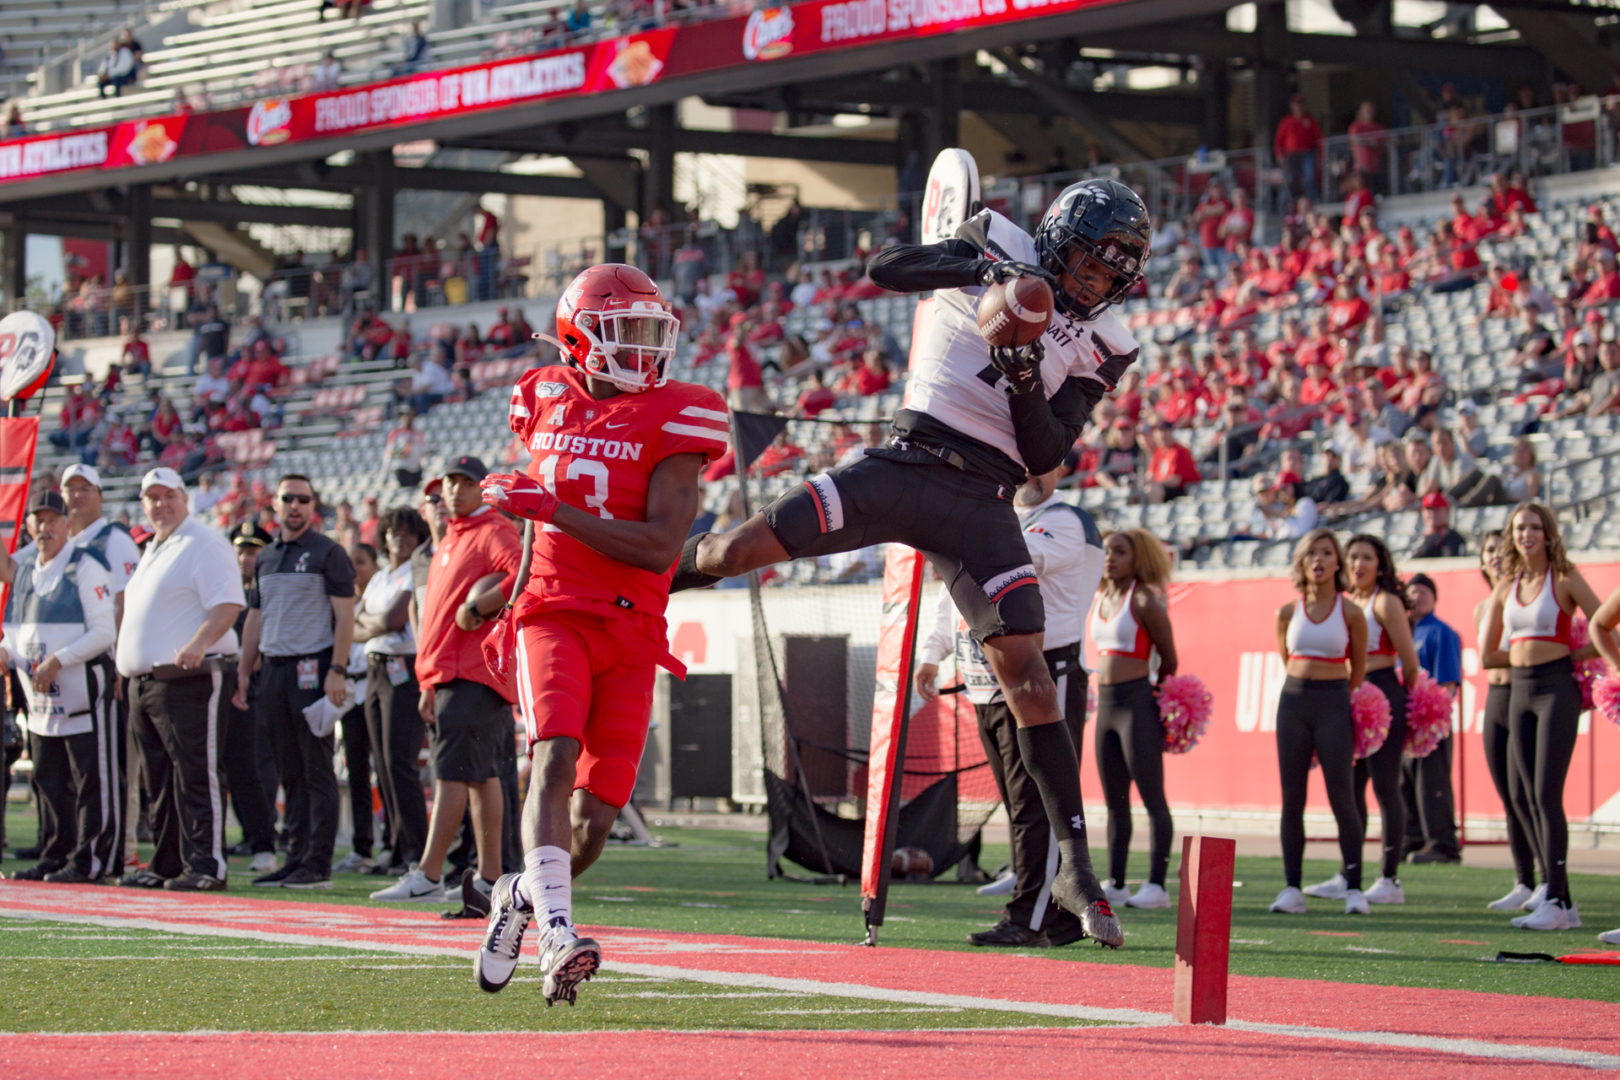 No. 18 Cincinnati dropped a spot in the latest AP Poll, but its 15-13 win over Temple, its seventh American Athletic Conference win, locked up the AAC East for the Bearcats. | File photo